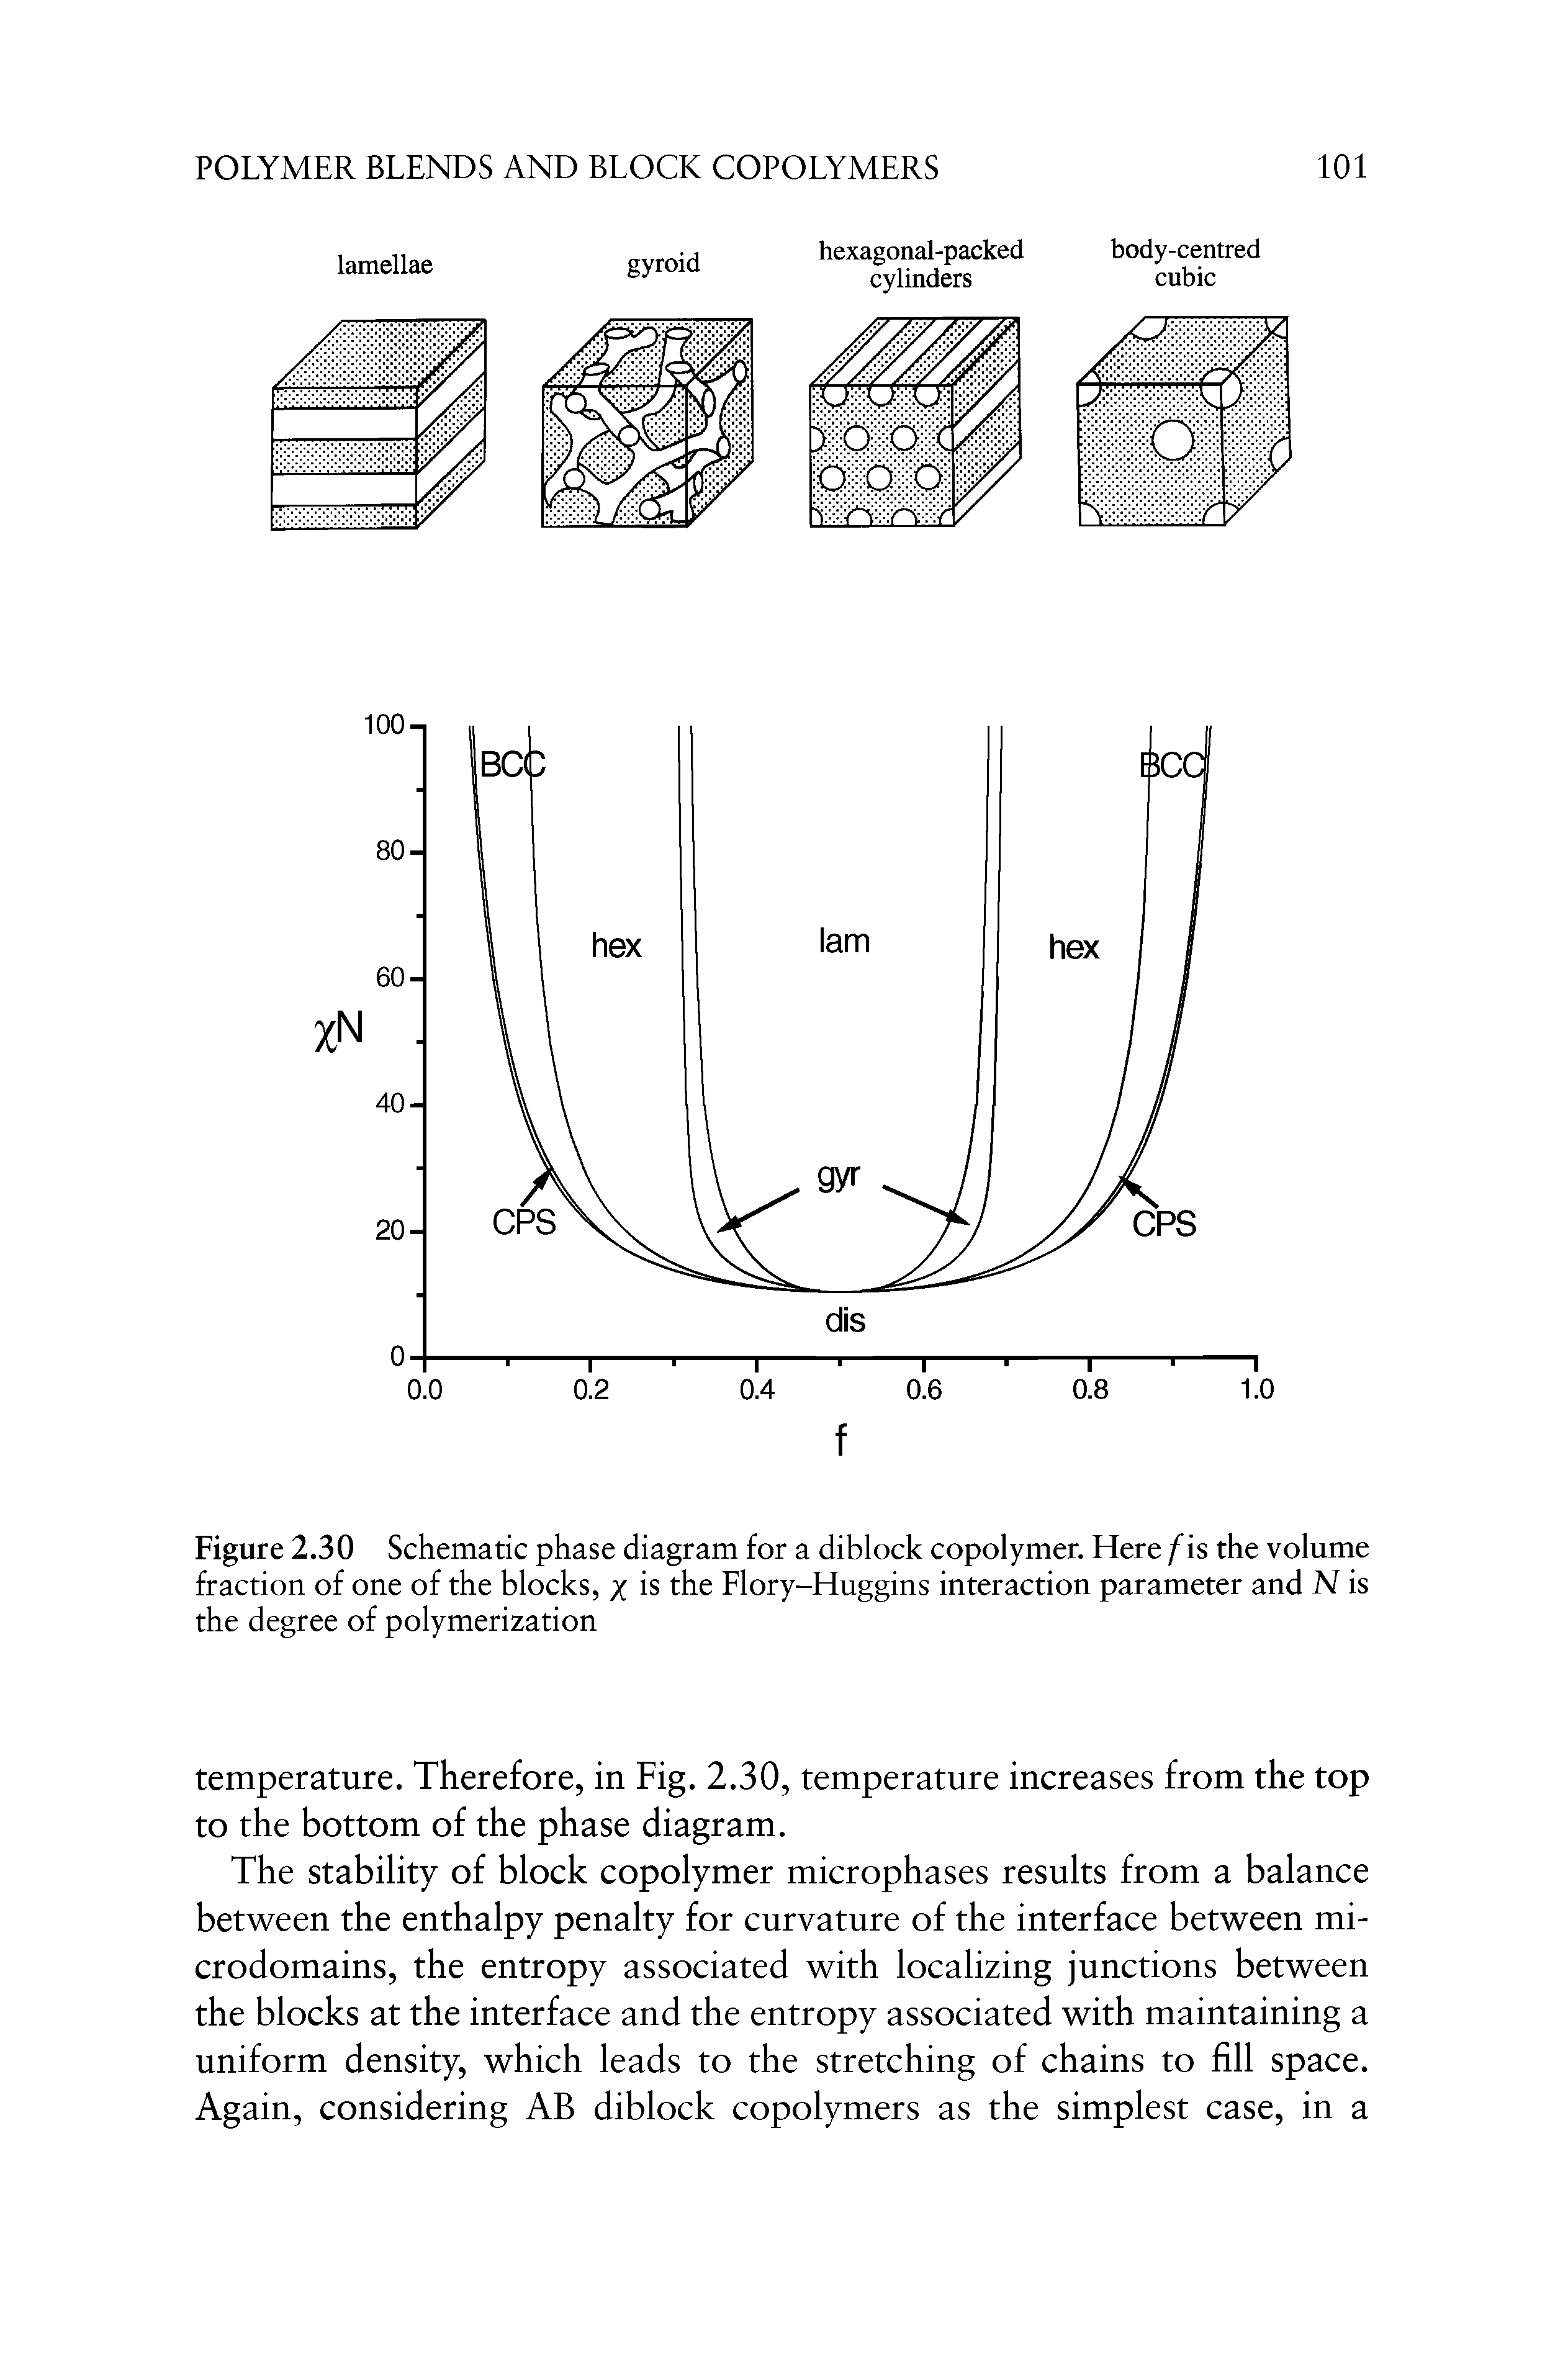 Figure 2.30 Schematic phase diagram for a diblock copolymer. Here fis the volume fraction of one of the blocks, x is the Flory-Huggins interaction parameter and N is the degree of polymerization...